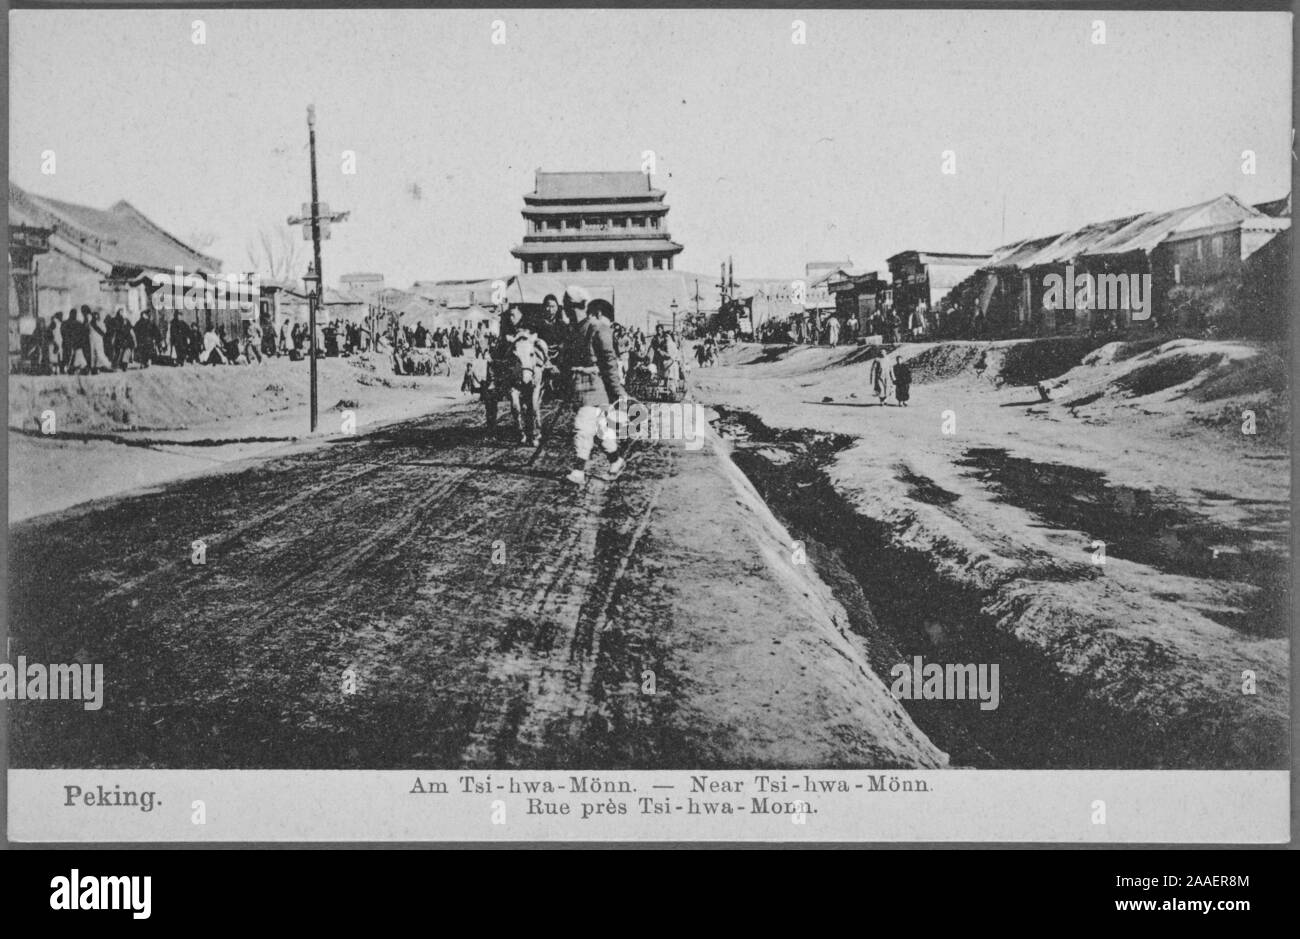 Engraved postcard of people walking along a dirt road near Tsi-hwa-Monn, Beijing, China, published by Graphische Gesellschaft, 1905. From the New York Public Library. () Stock Photo